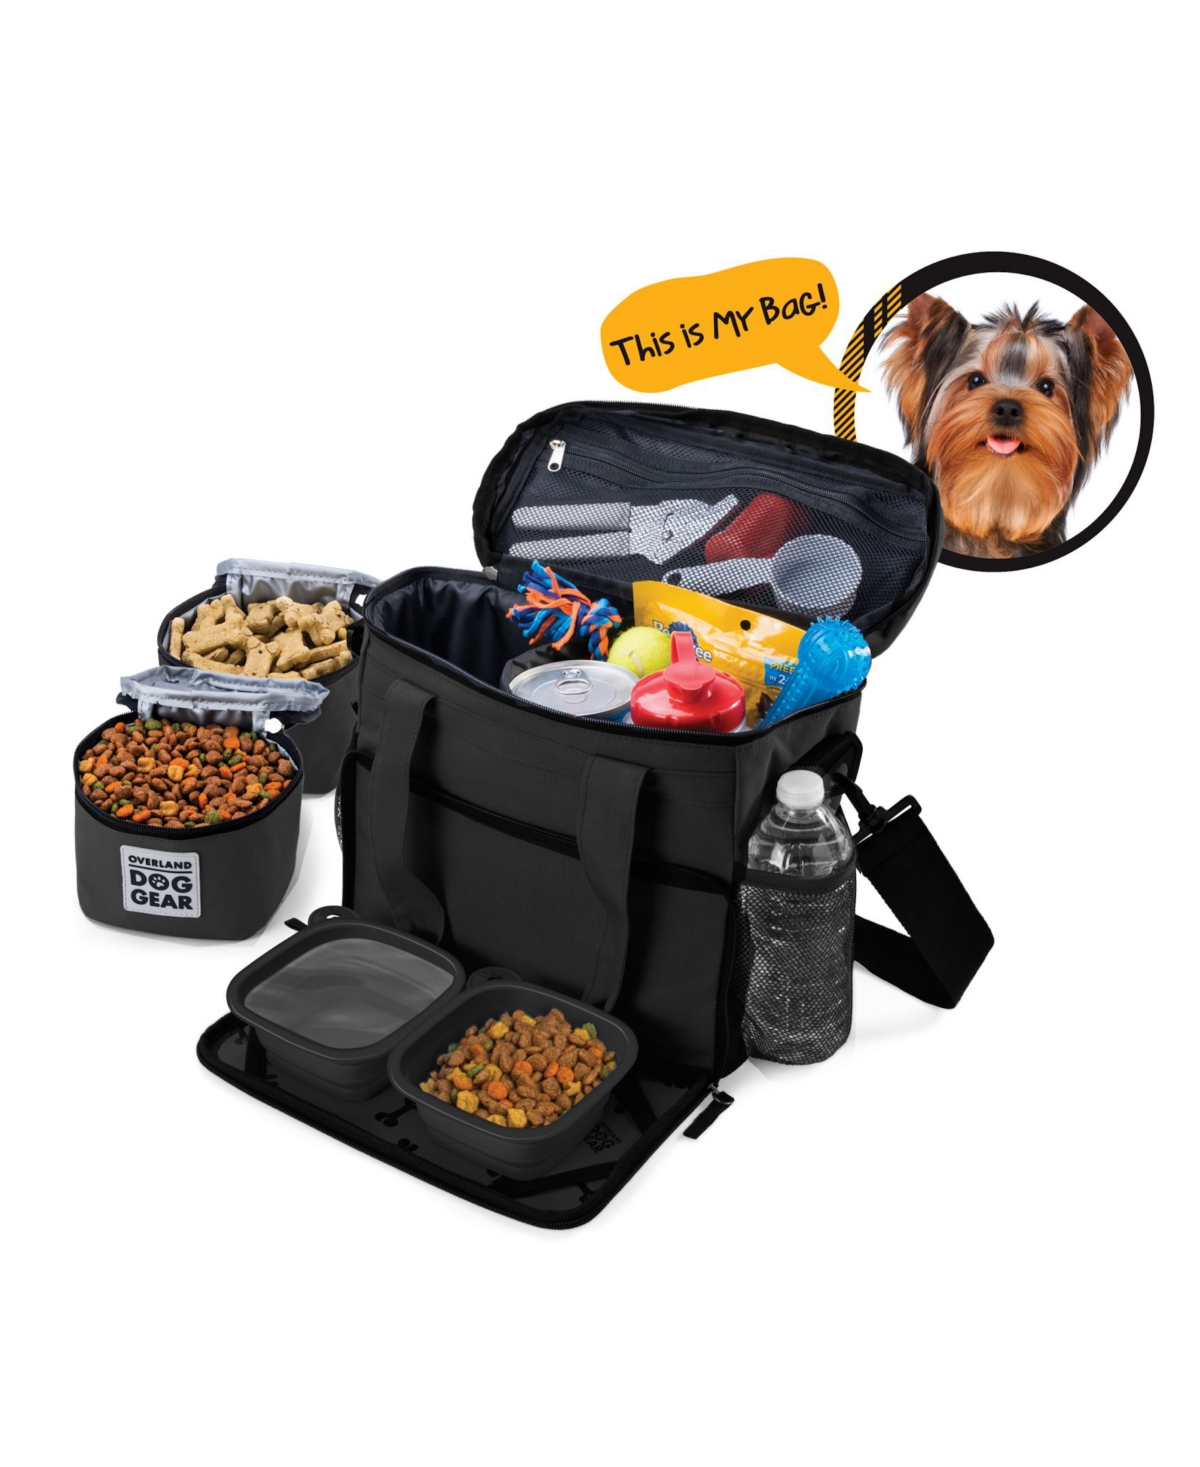 Overland Dog Gear Week Away Bag for Small Dogs - Black